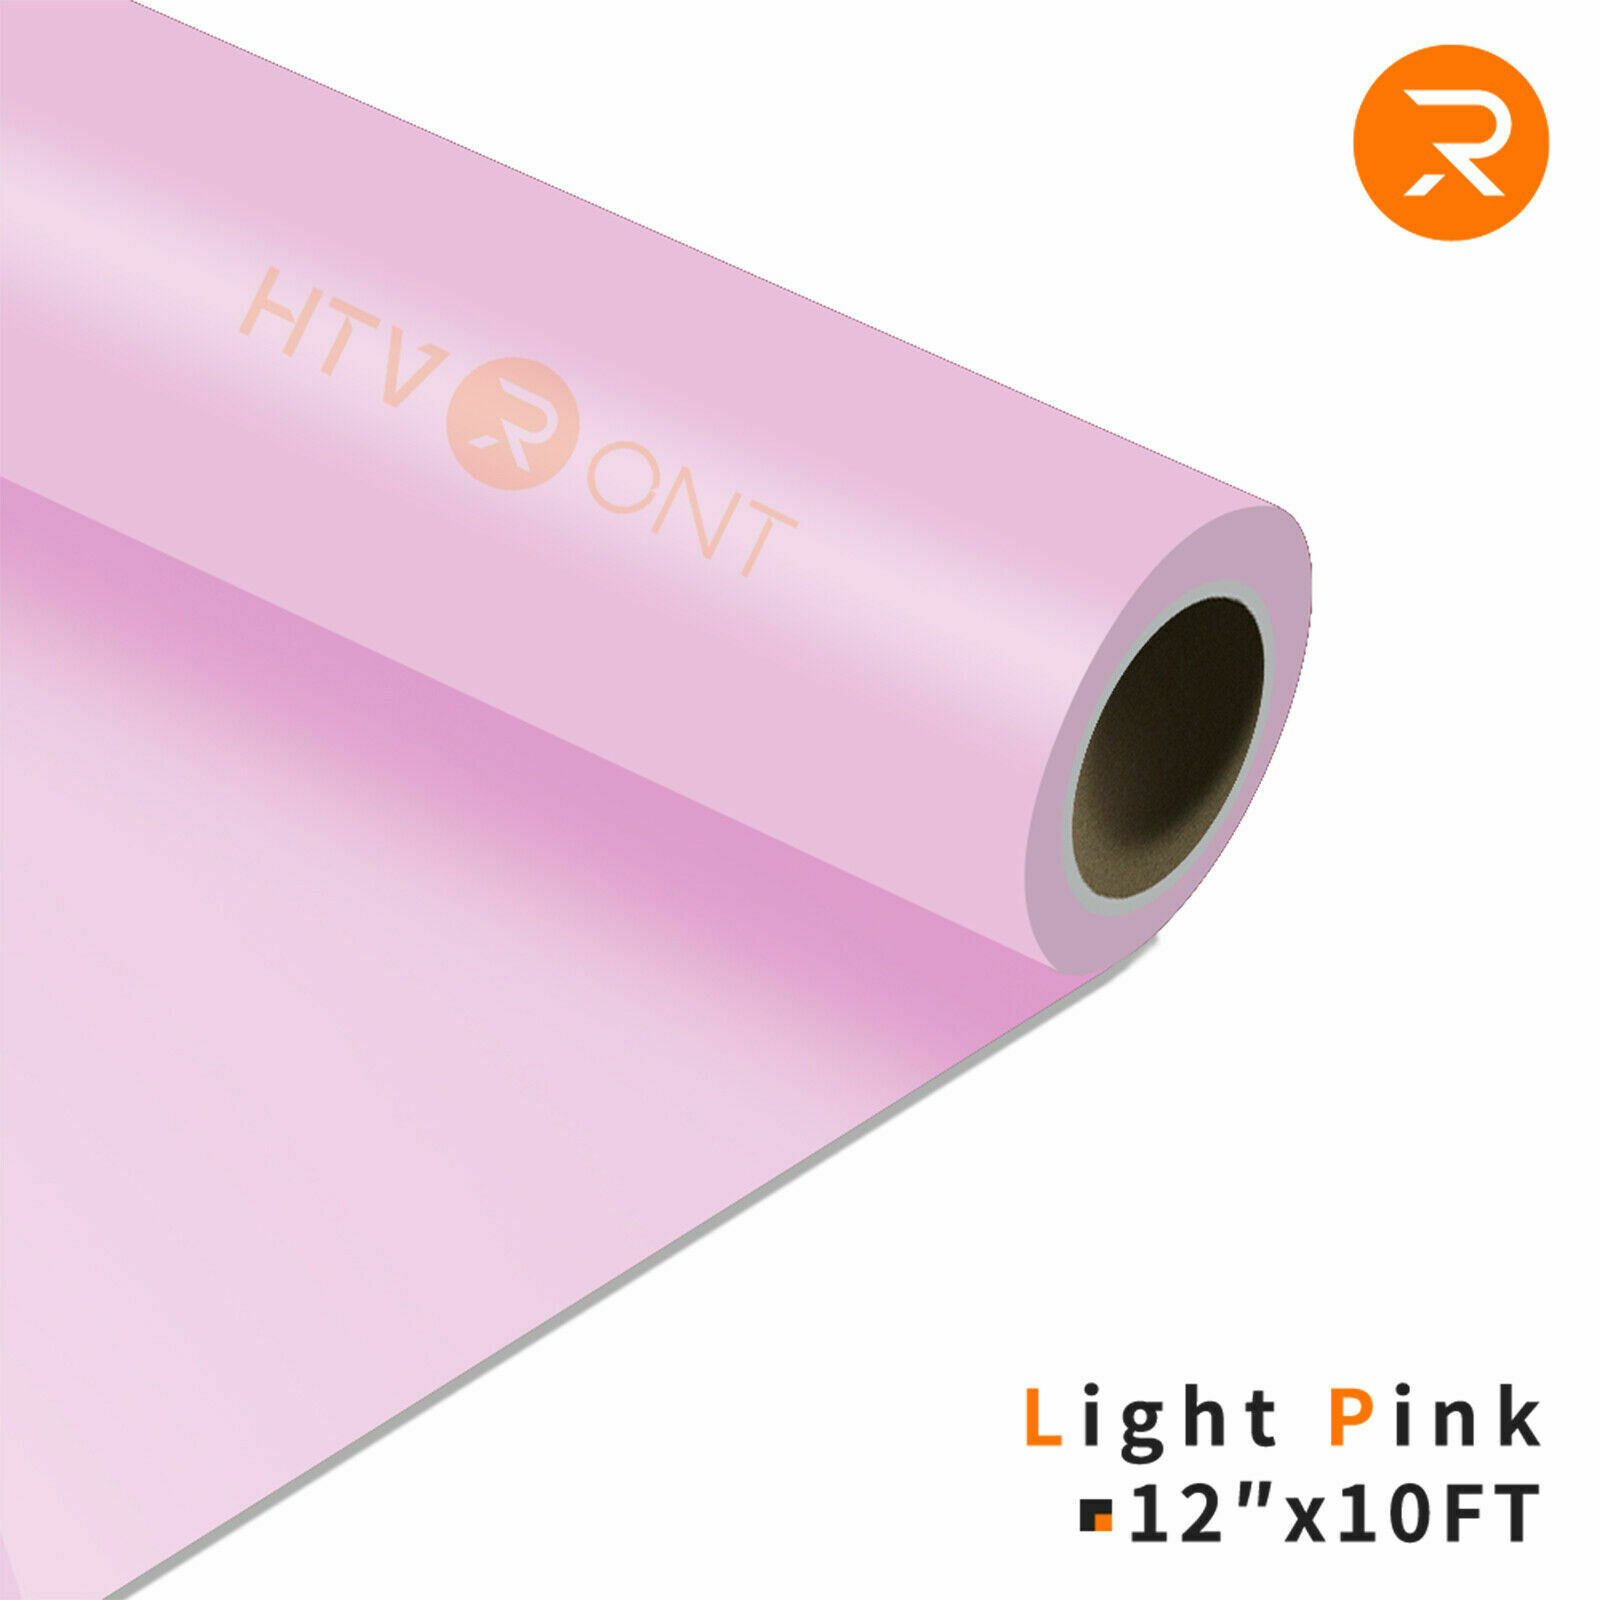 Light Pink Heat Transfer Vinyl Rolls-12 x 10FT Light Pink Iron on Vinyl  for Shirts,Light Pink Iron on for Cricut&All Cutter Machine-Easy to  Cut&Weed